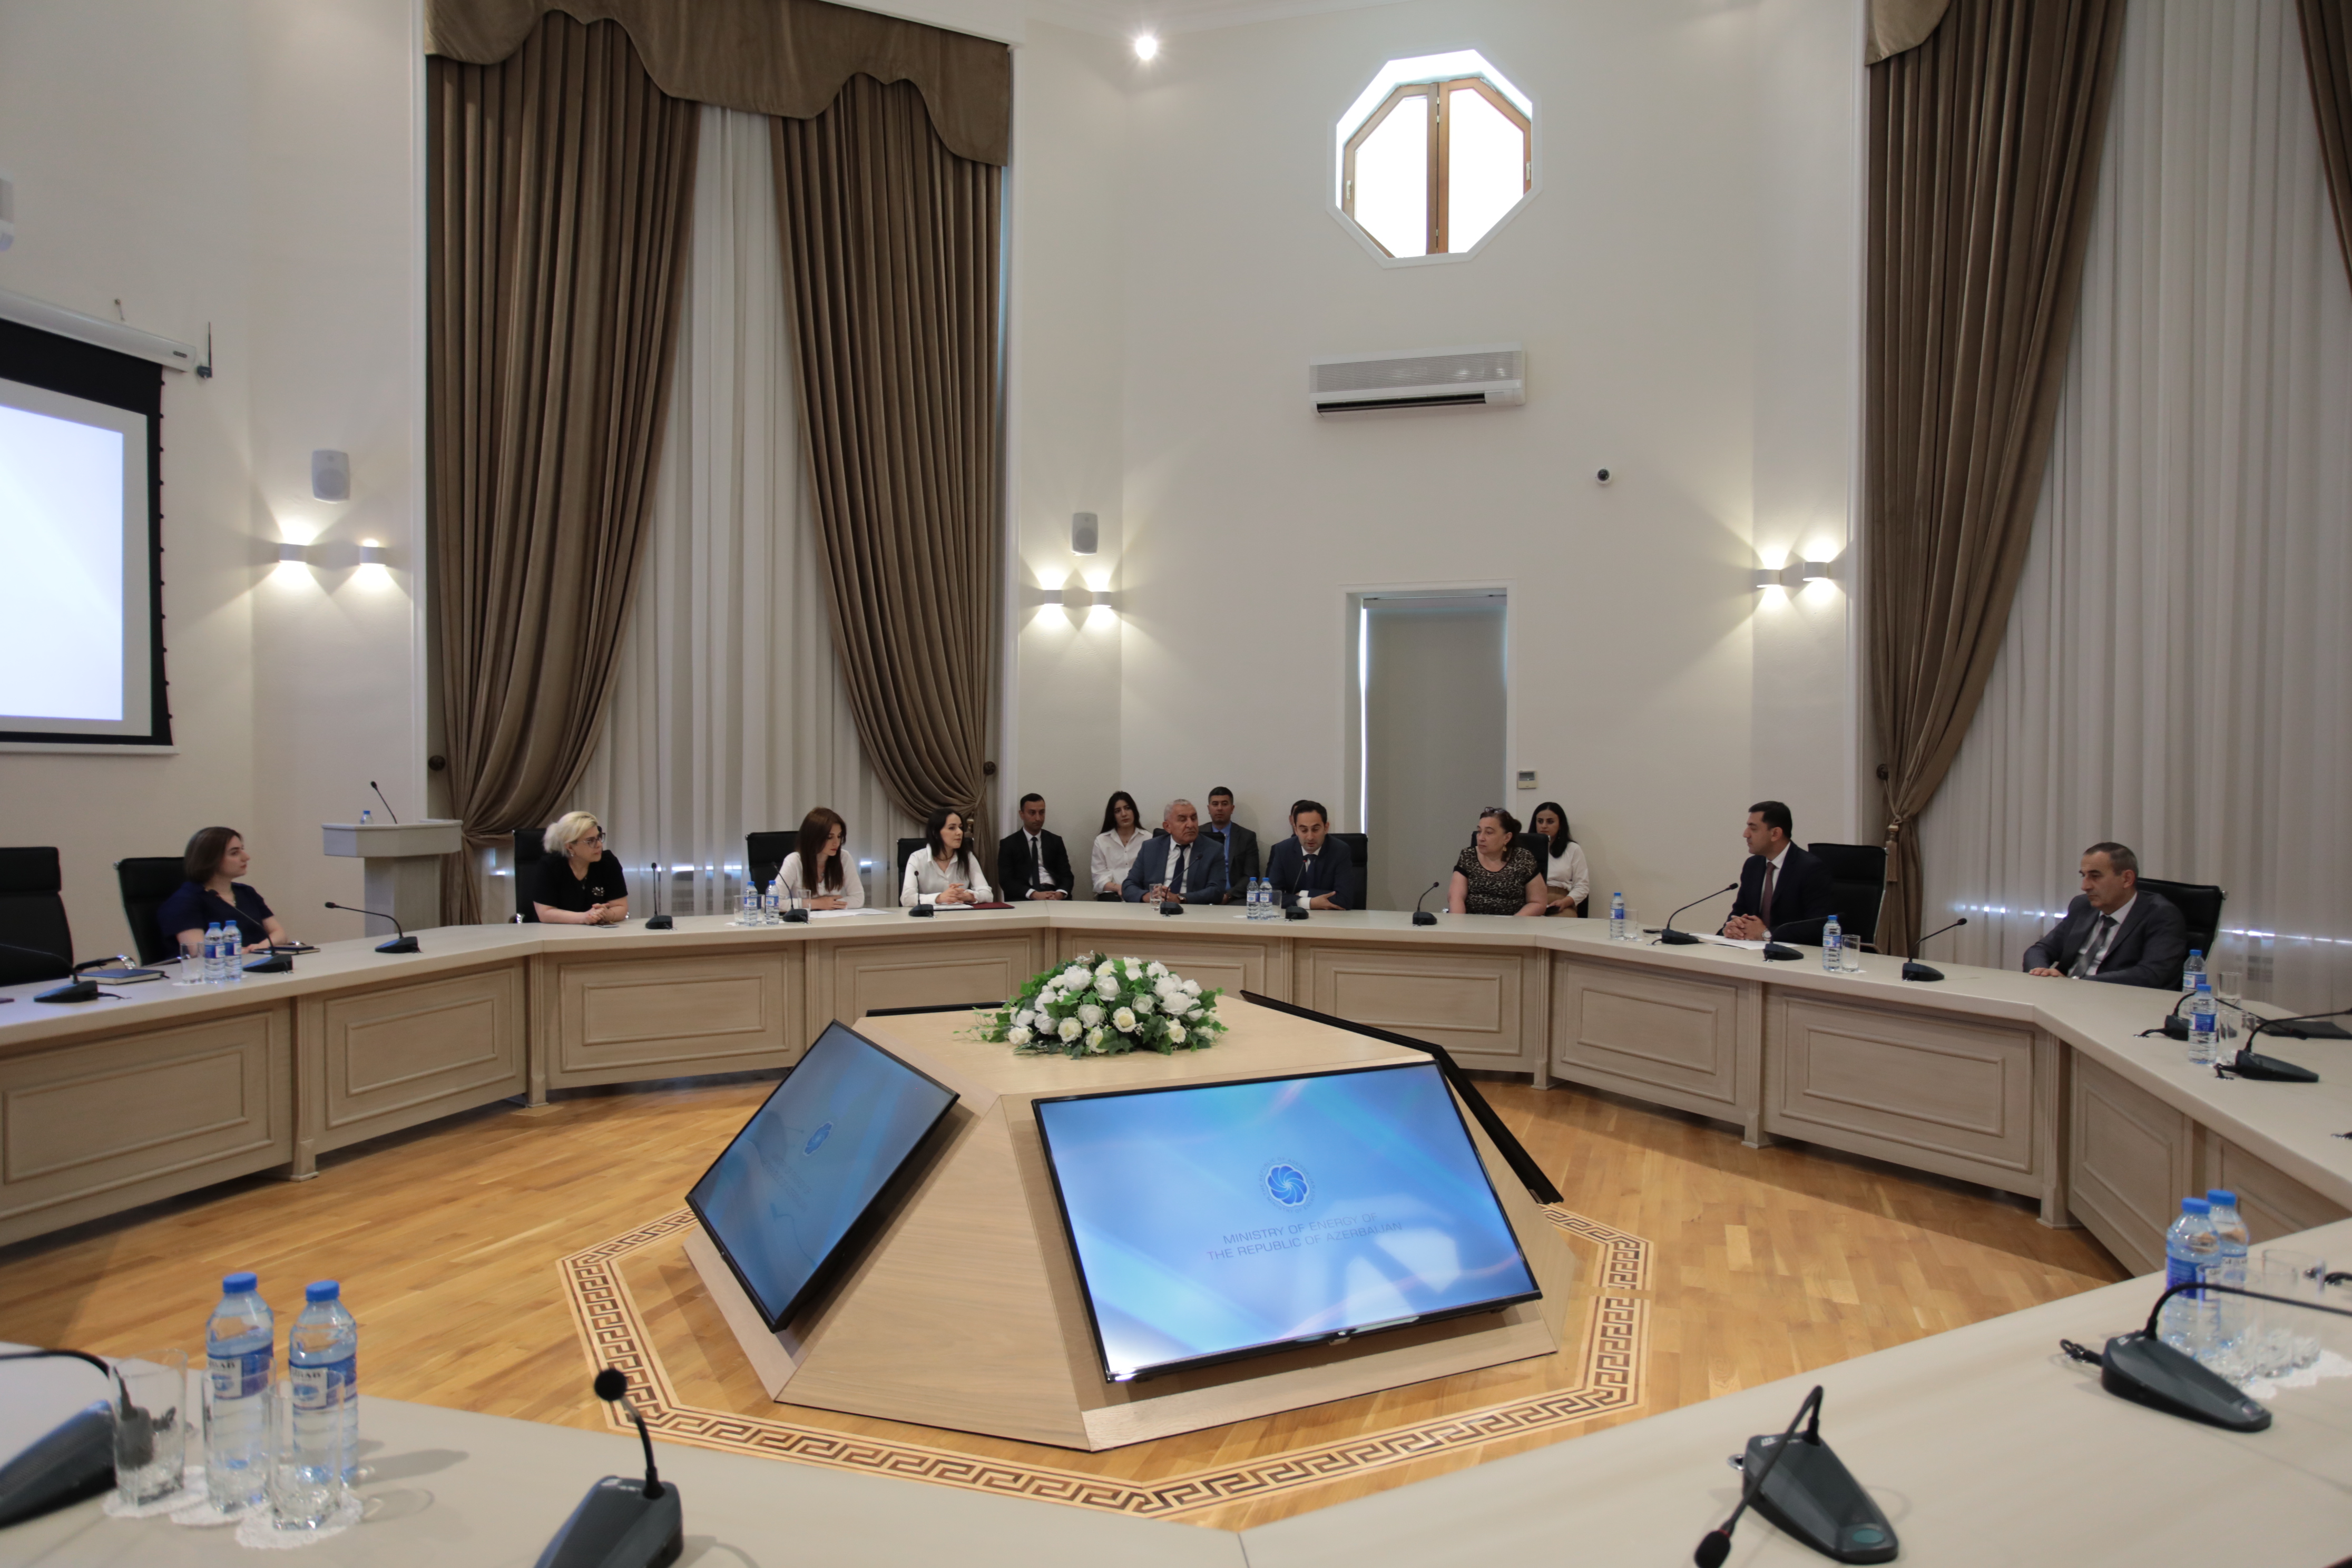 Professional holiday of civil servants was celebrated at the Ministry of Energy